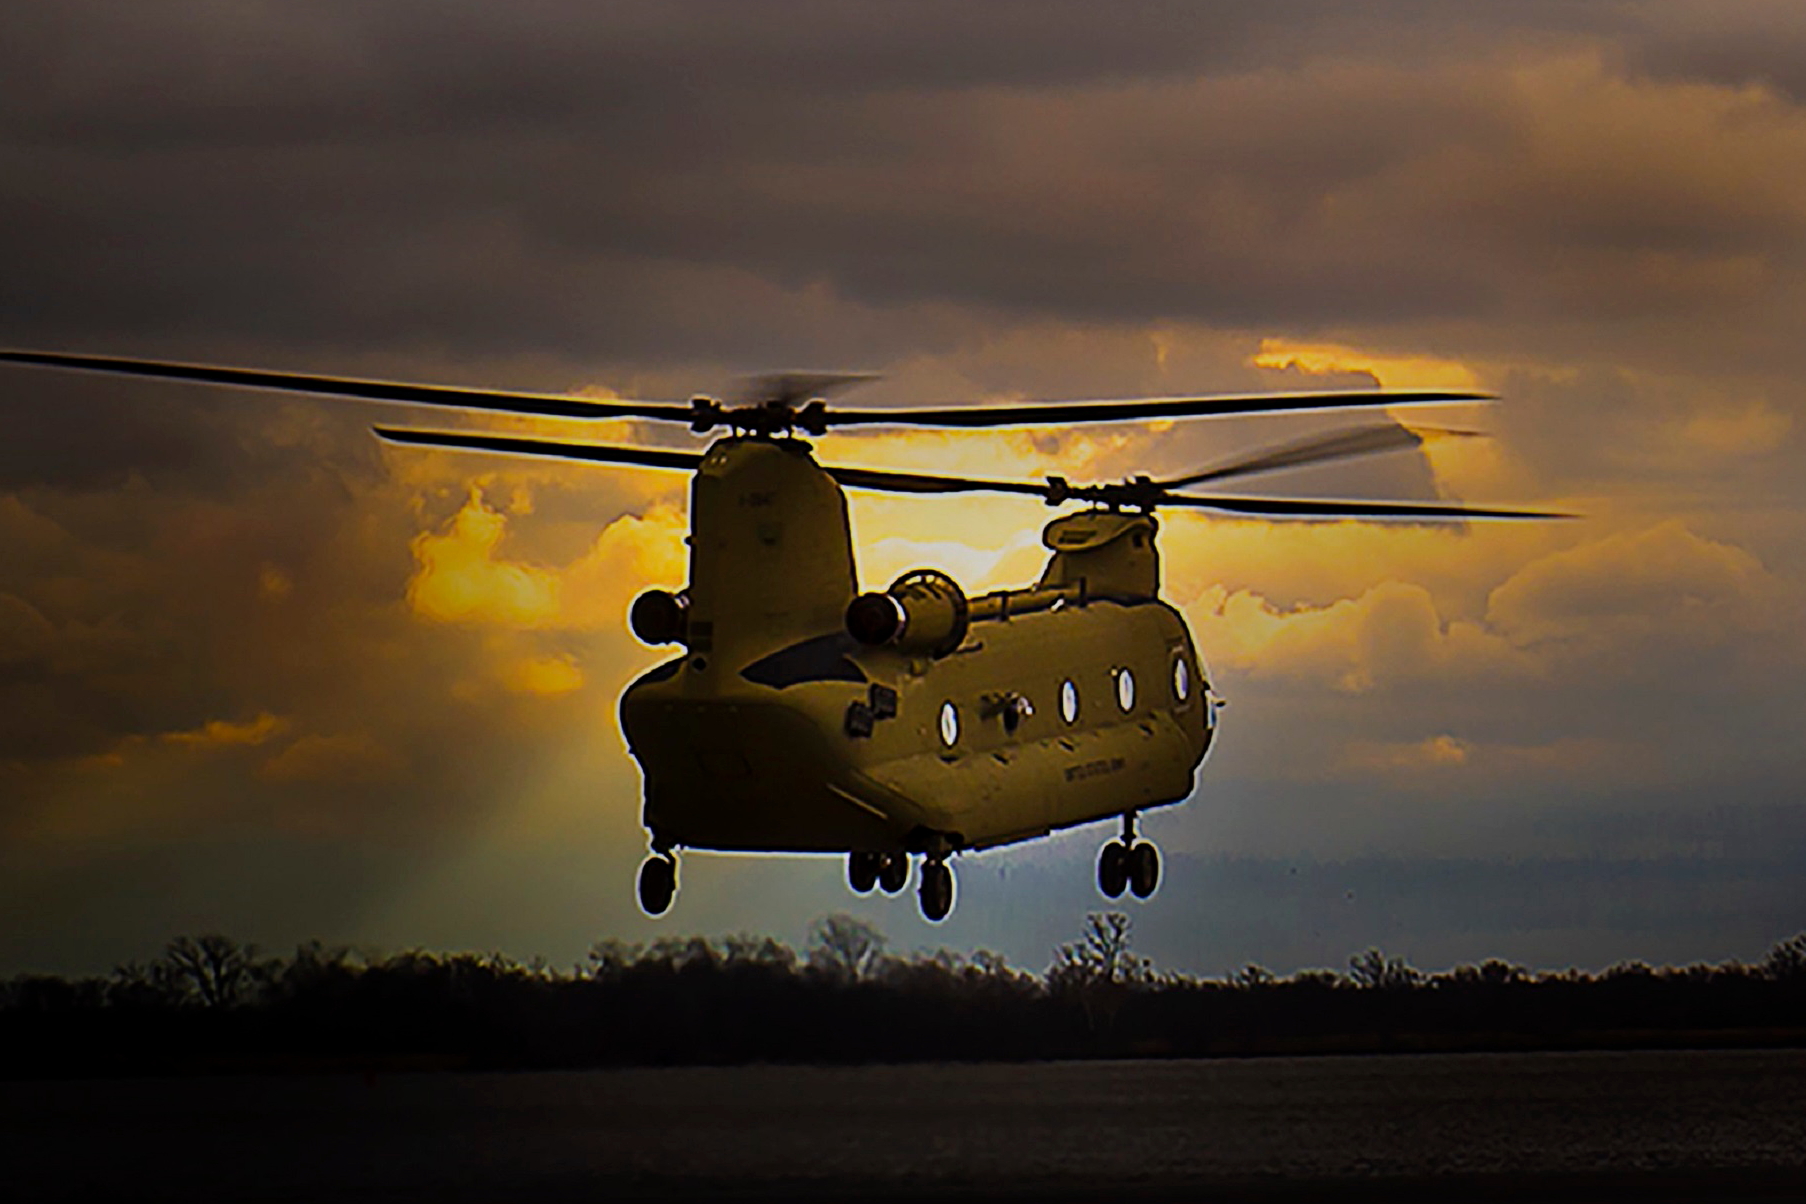 Boeing has signed a deal to upgrade all 17 of Spain’s CH-47D Chinook helicopters to the F-model configuration, adding features such as the digital automatic flight control system, common avionics architecture system and advanced cargo handling to align that country’s fleet with those of other nations. Click to enlarge.